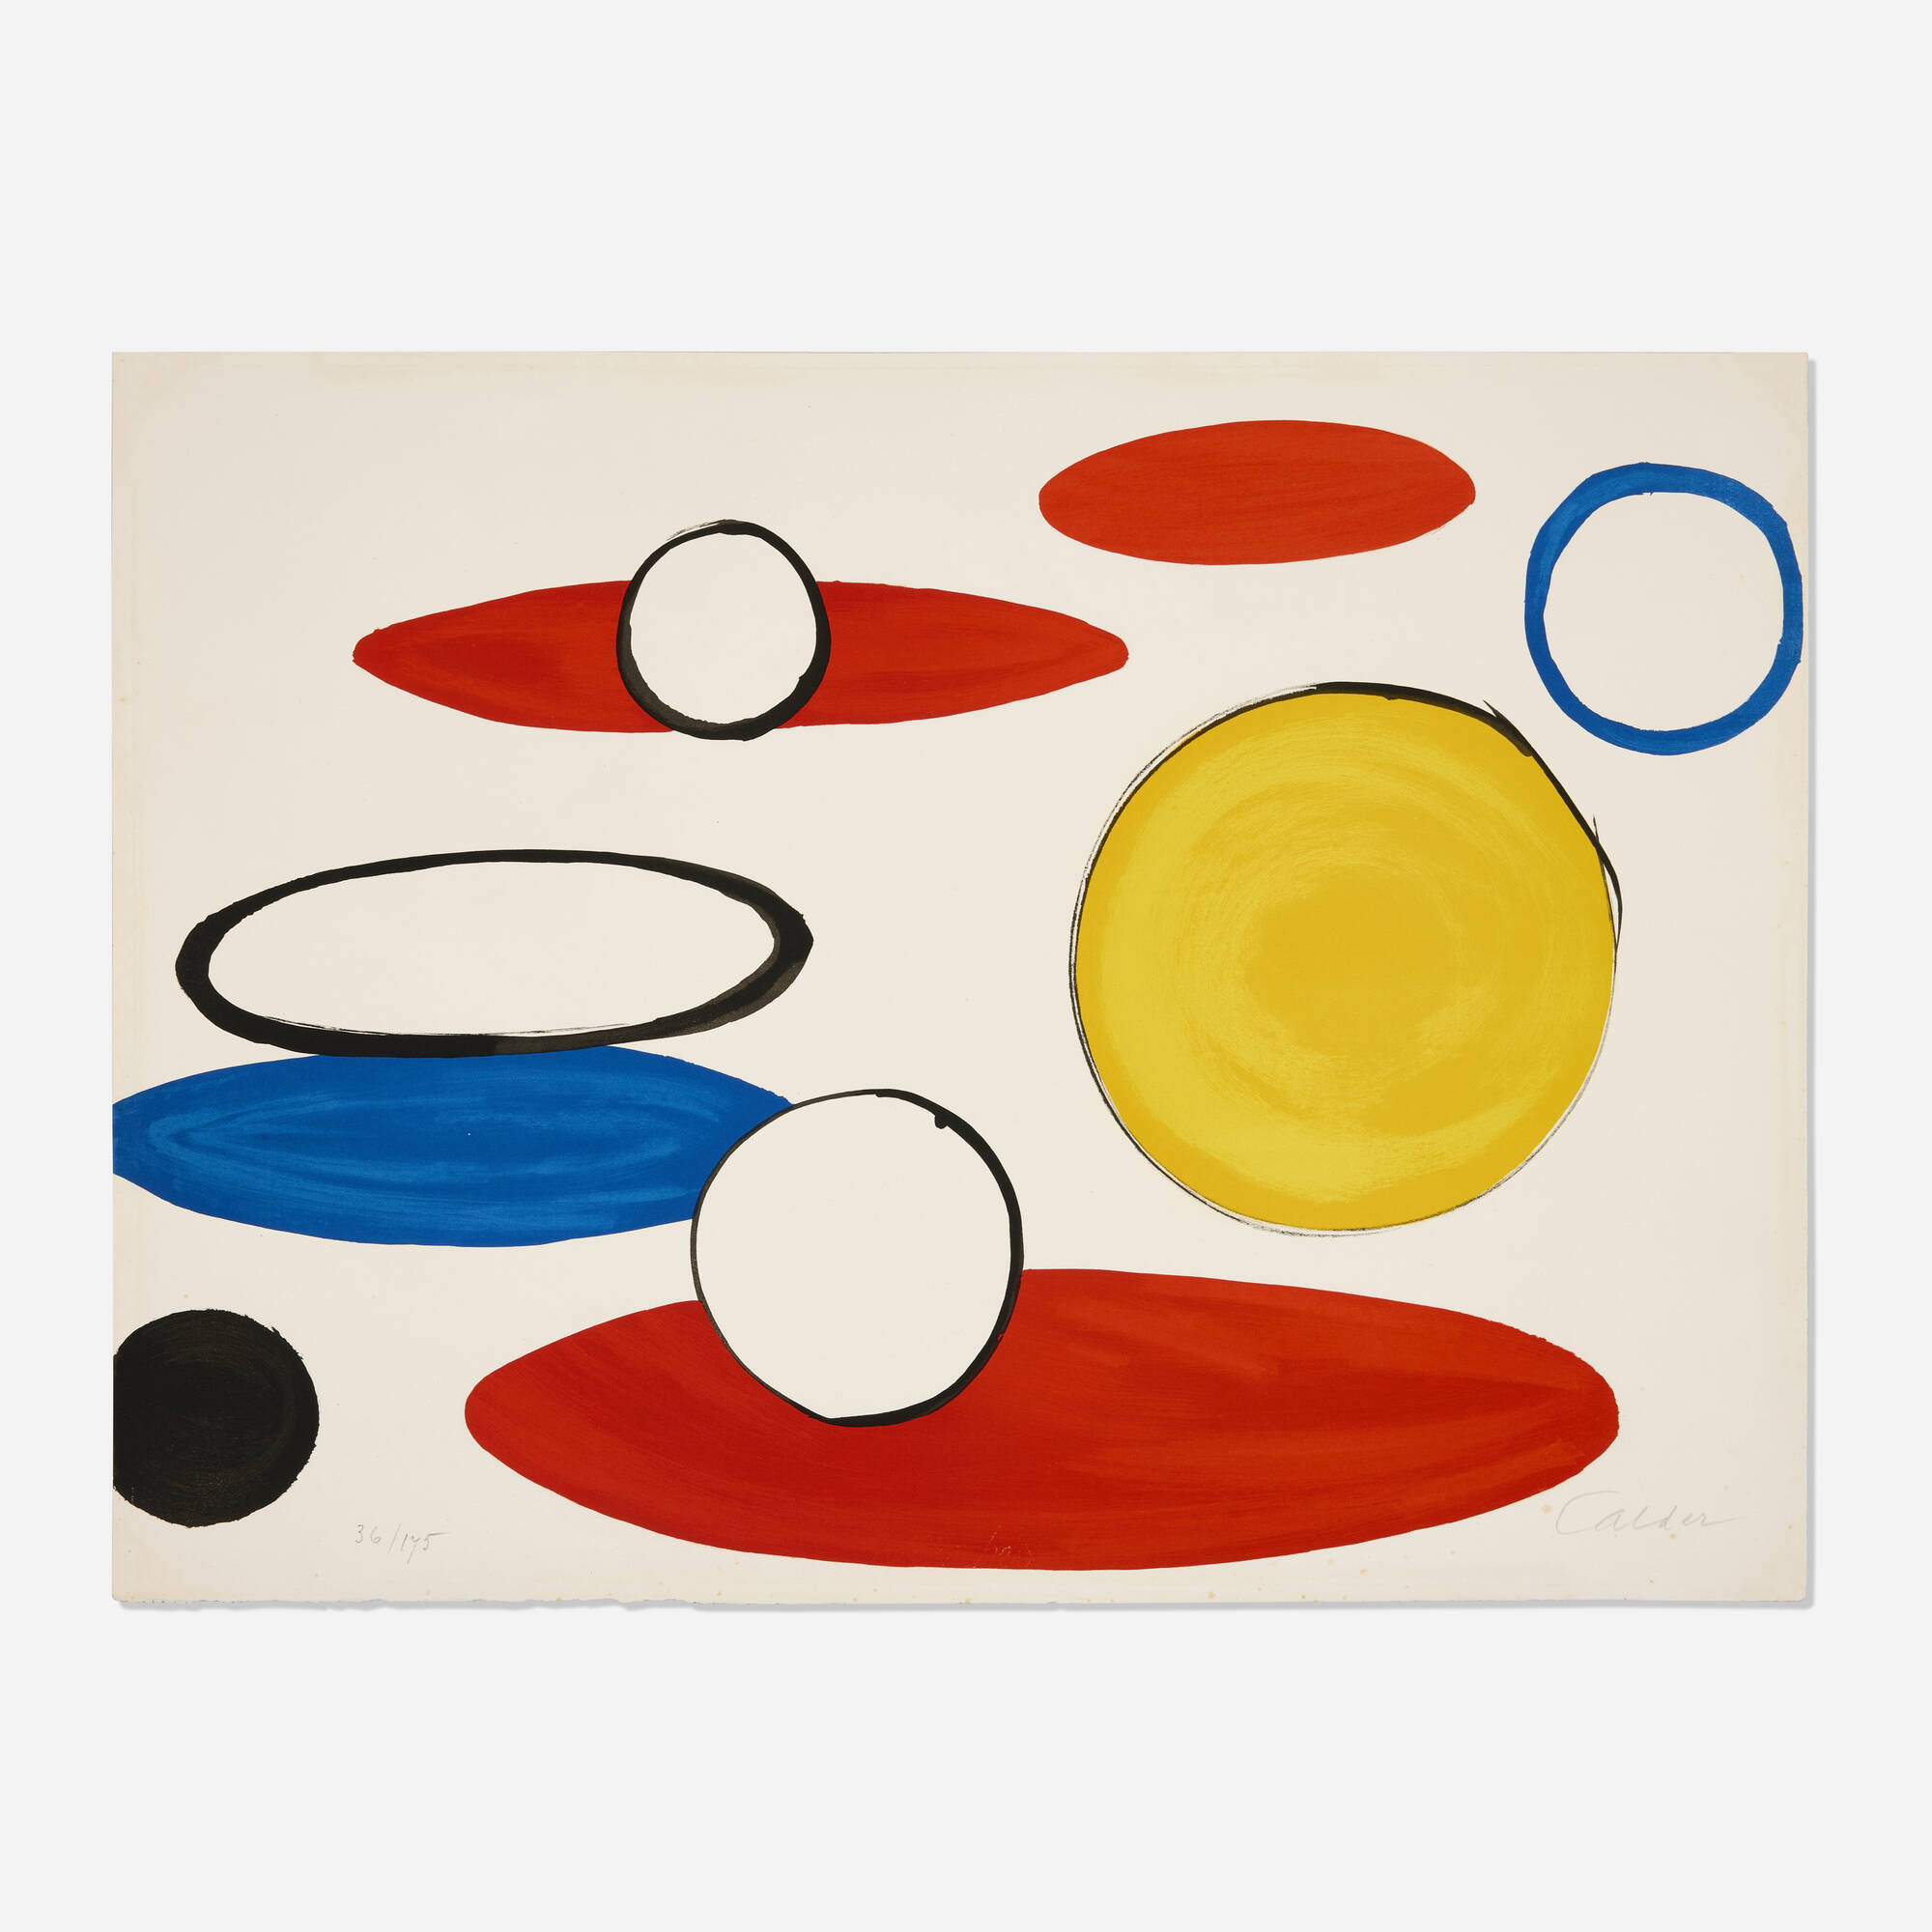 127: ALEXANDER CALDER, White Circles and Ellipses (from the Our 